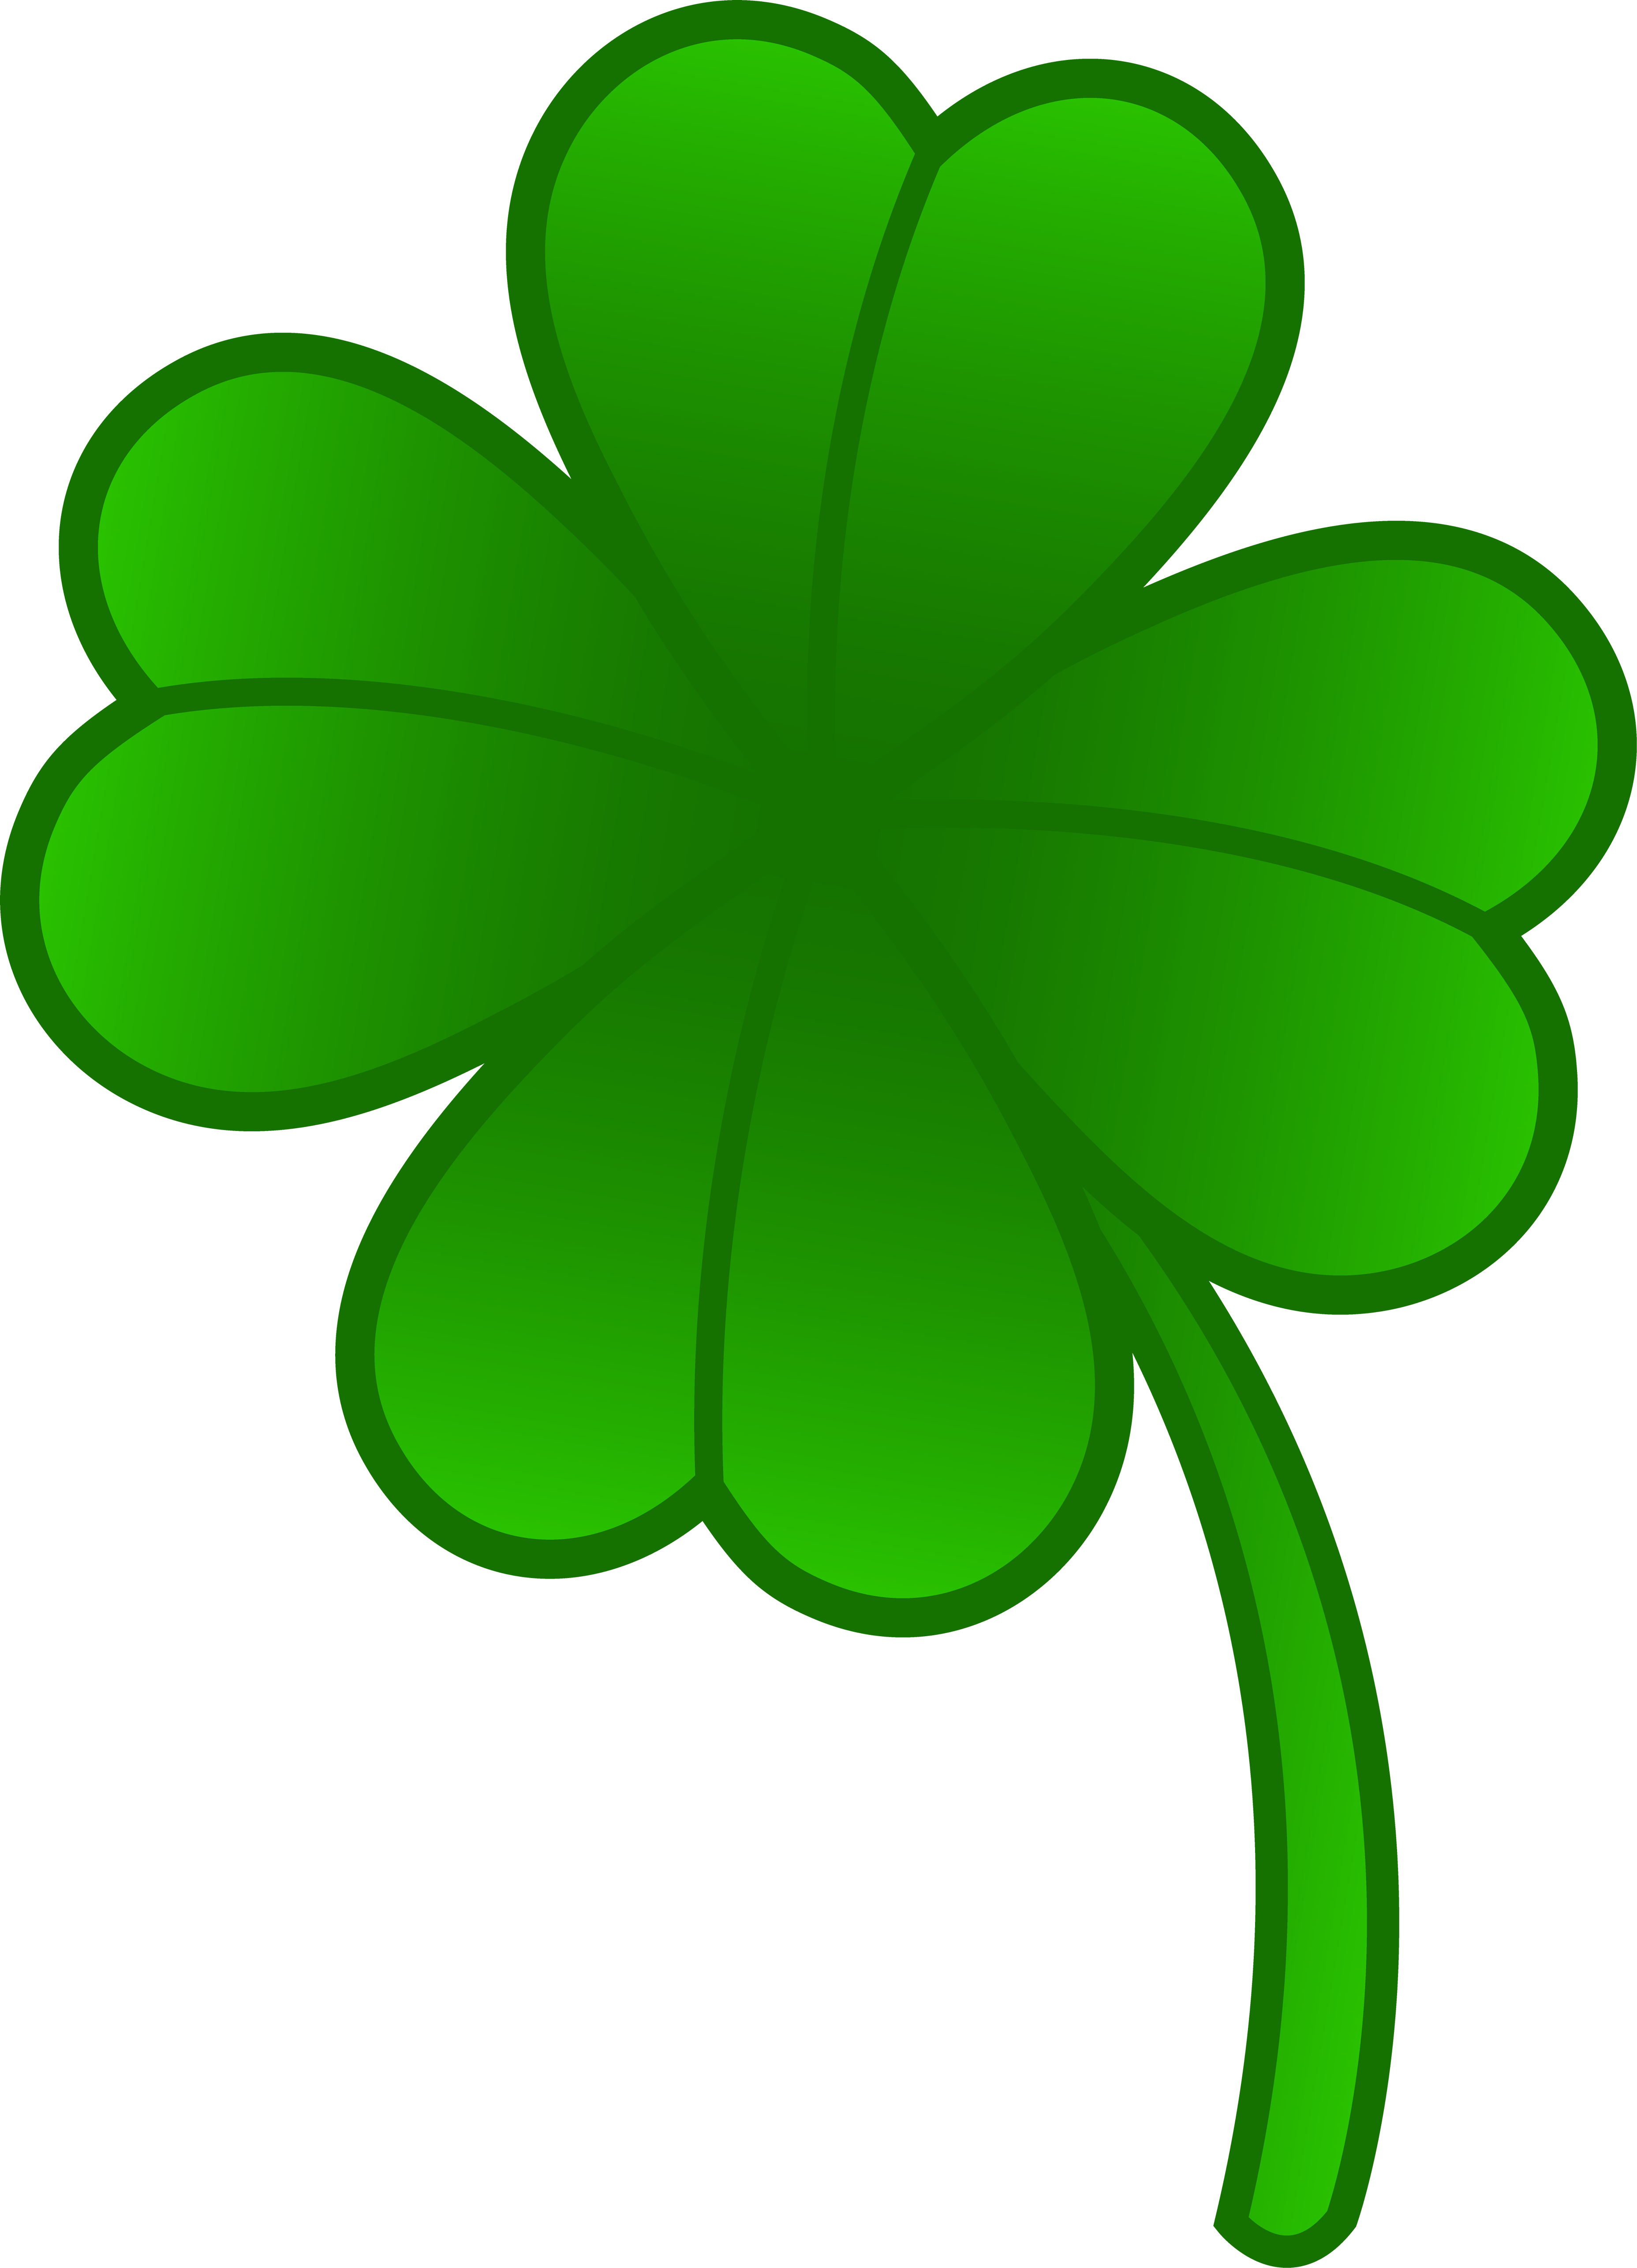 Clover HD PNG - 91752